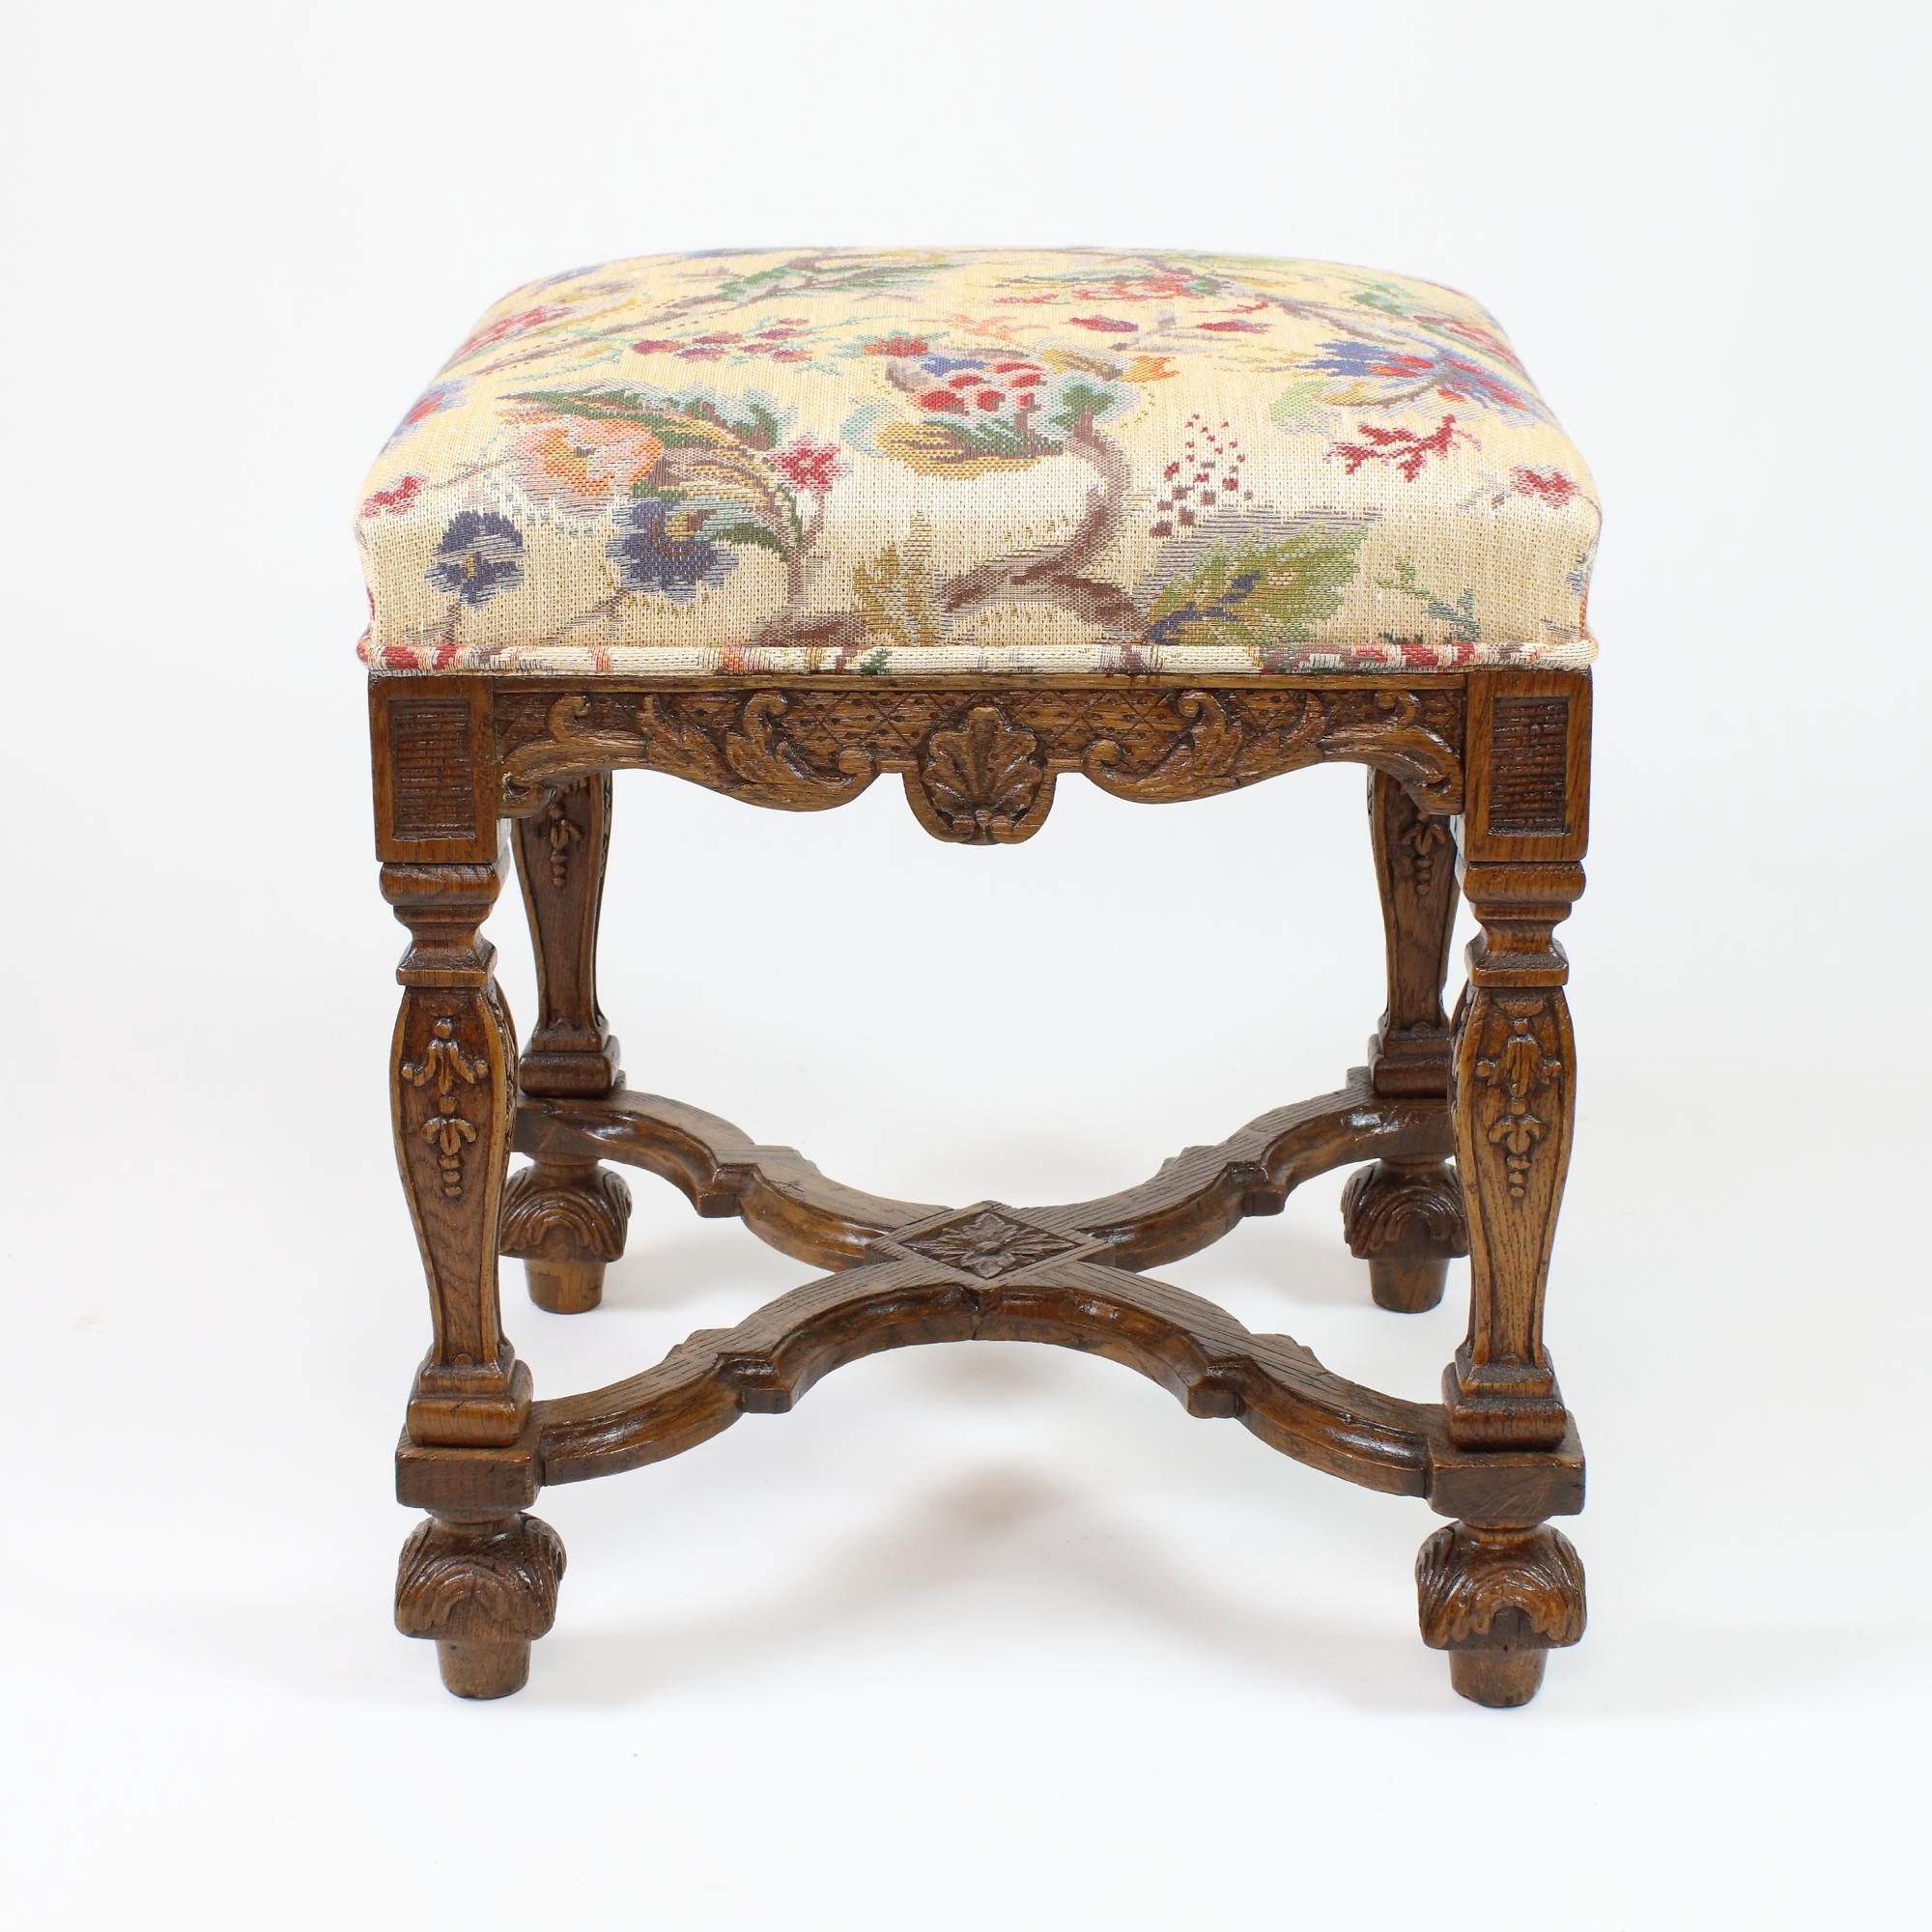 Hand-Carved Early 18th Century French Louis XIV/Régence Carved Oak Stool or Tabouret For Sale